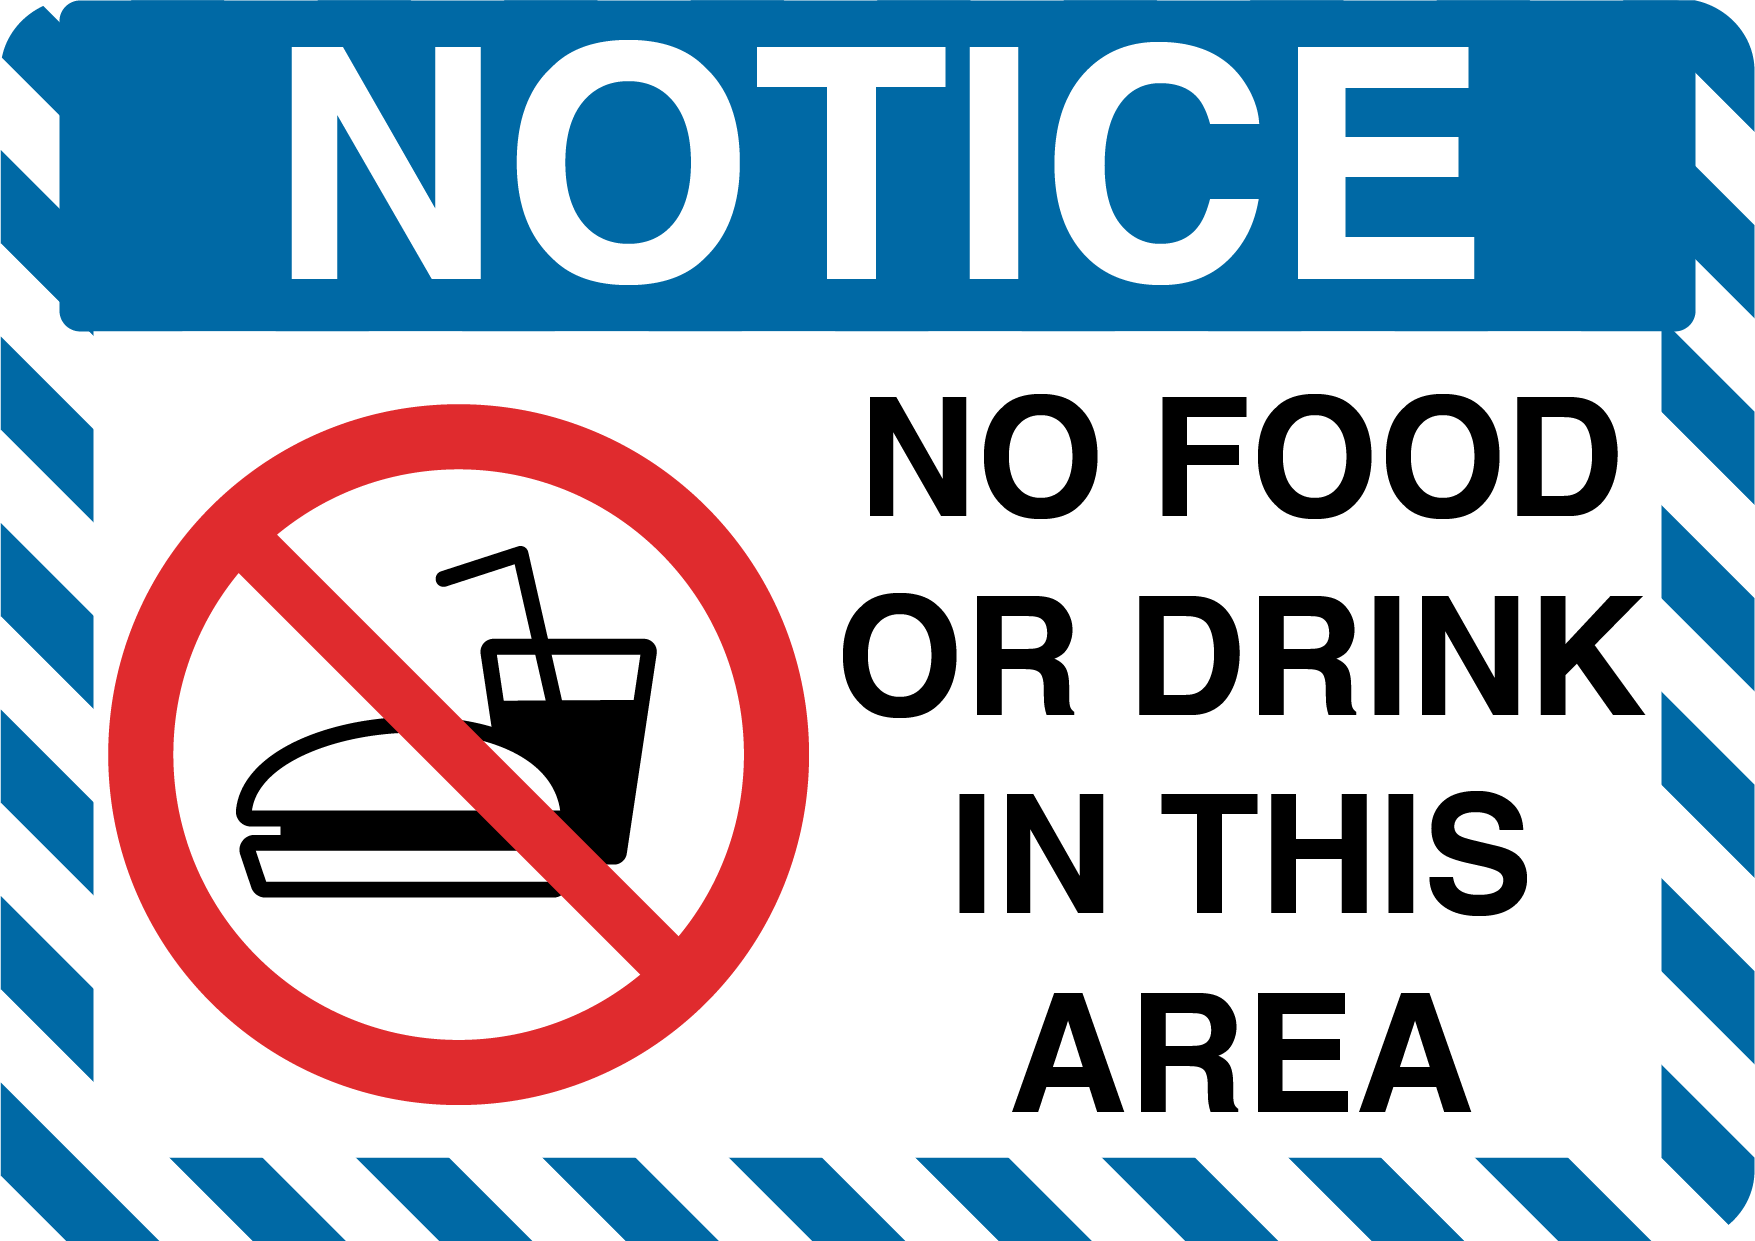 Notice "No Food Or Drink In This Area" Durable Matte Laminated Vinyl Floor Sign- Various Sizes Available